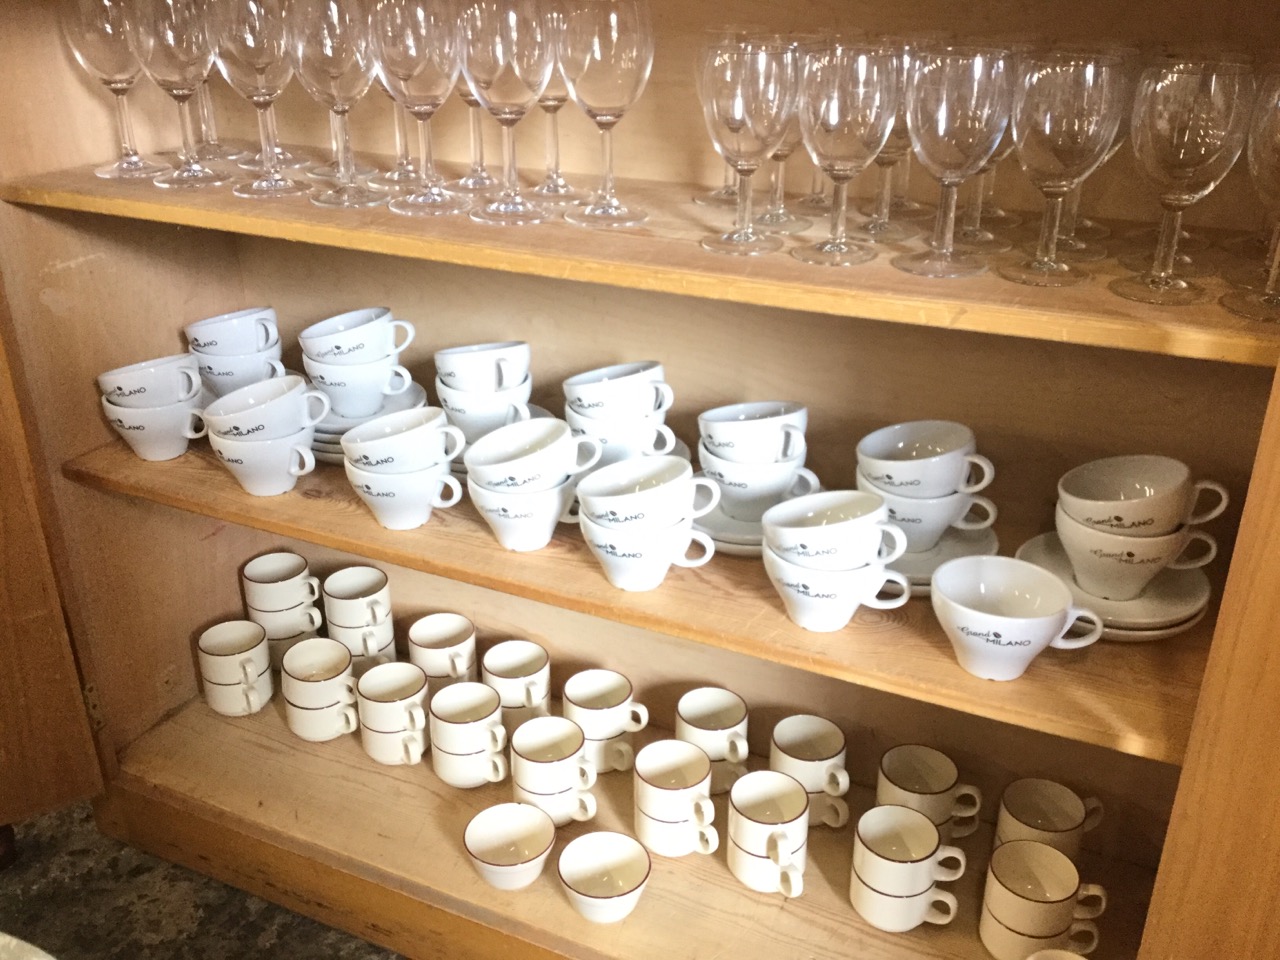 Miscellaneous wine glasses and cups & saucers including 13 large and 19 smaller glasses, 18 Grand